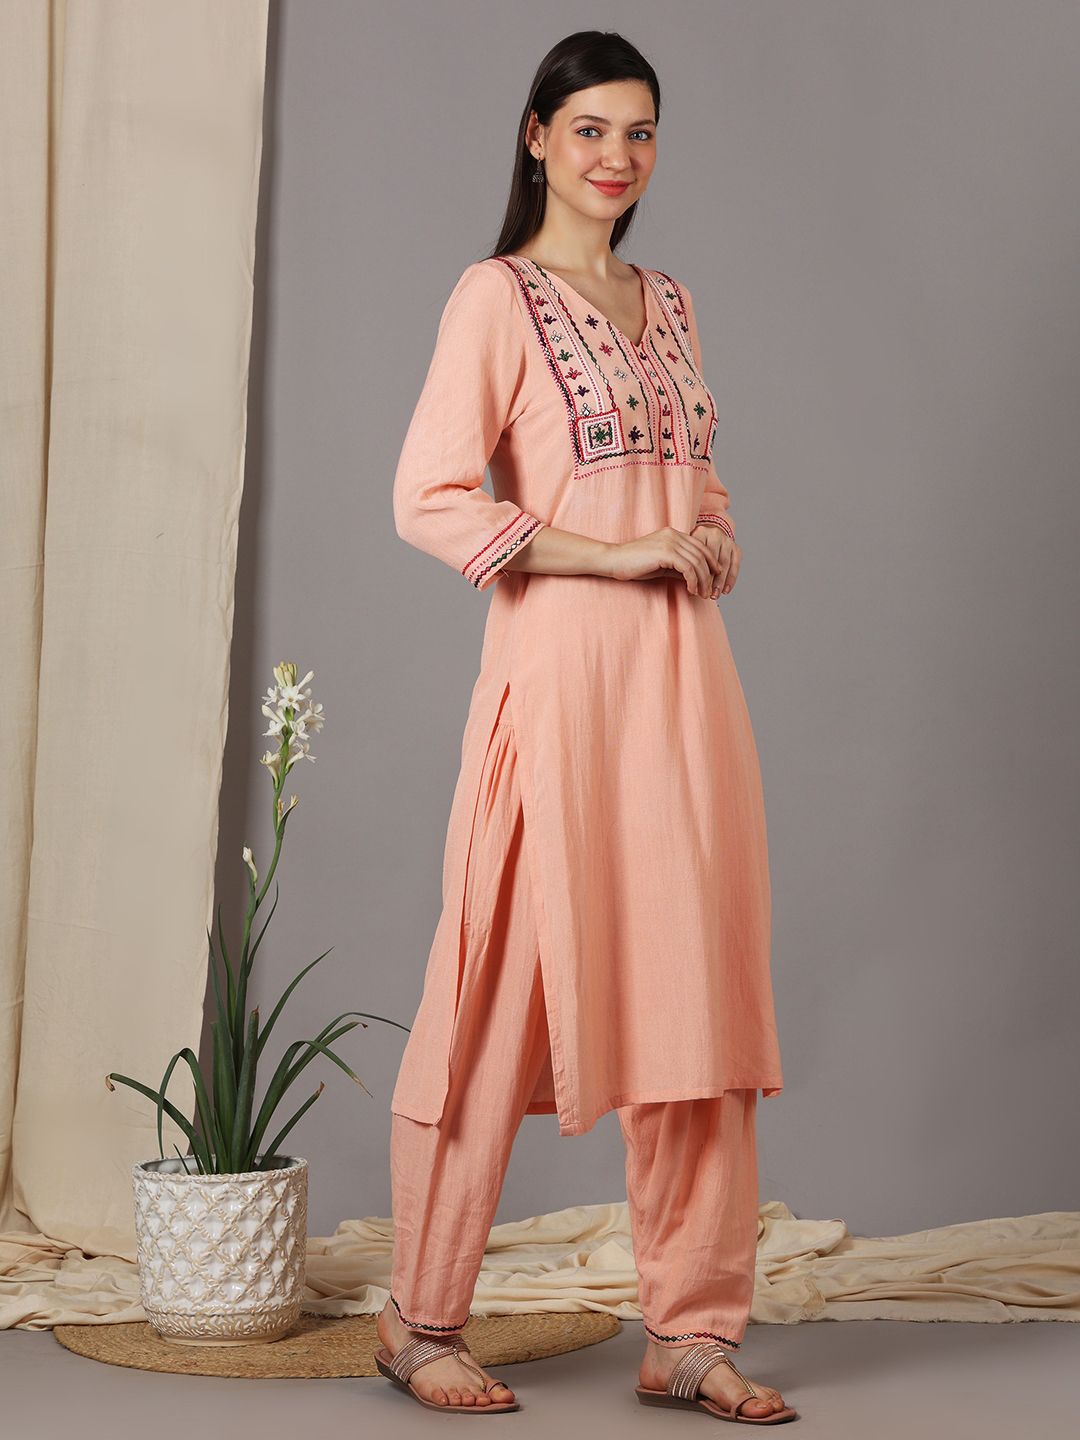 PEACH FRONT MULTI COLORED EMBROIDERED KURTI WITH SALWAR